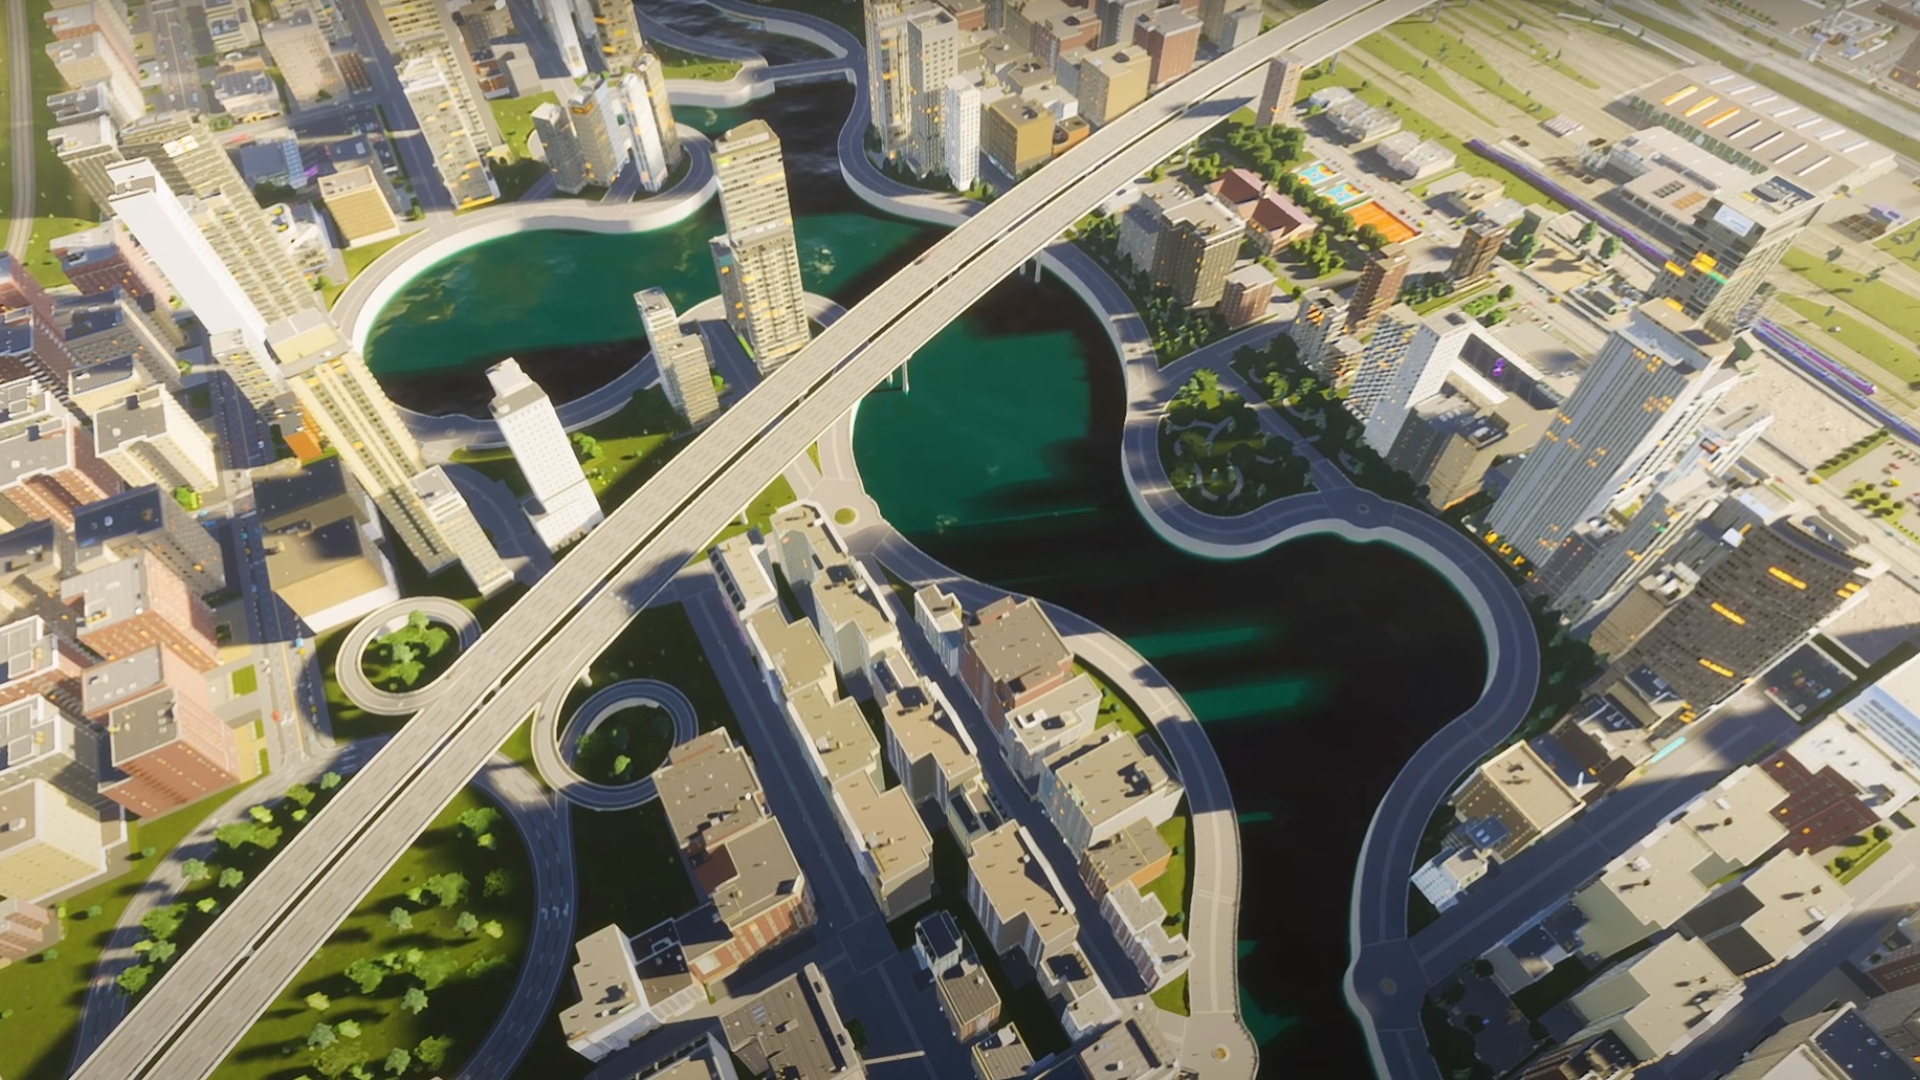 Cities Skylines 2 Steam Reviews Cs2 Paradox Colossal Order City Building Game Simcity 2013 